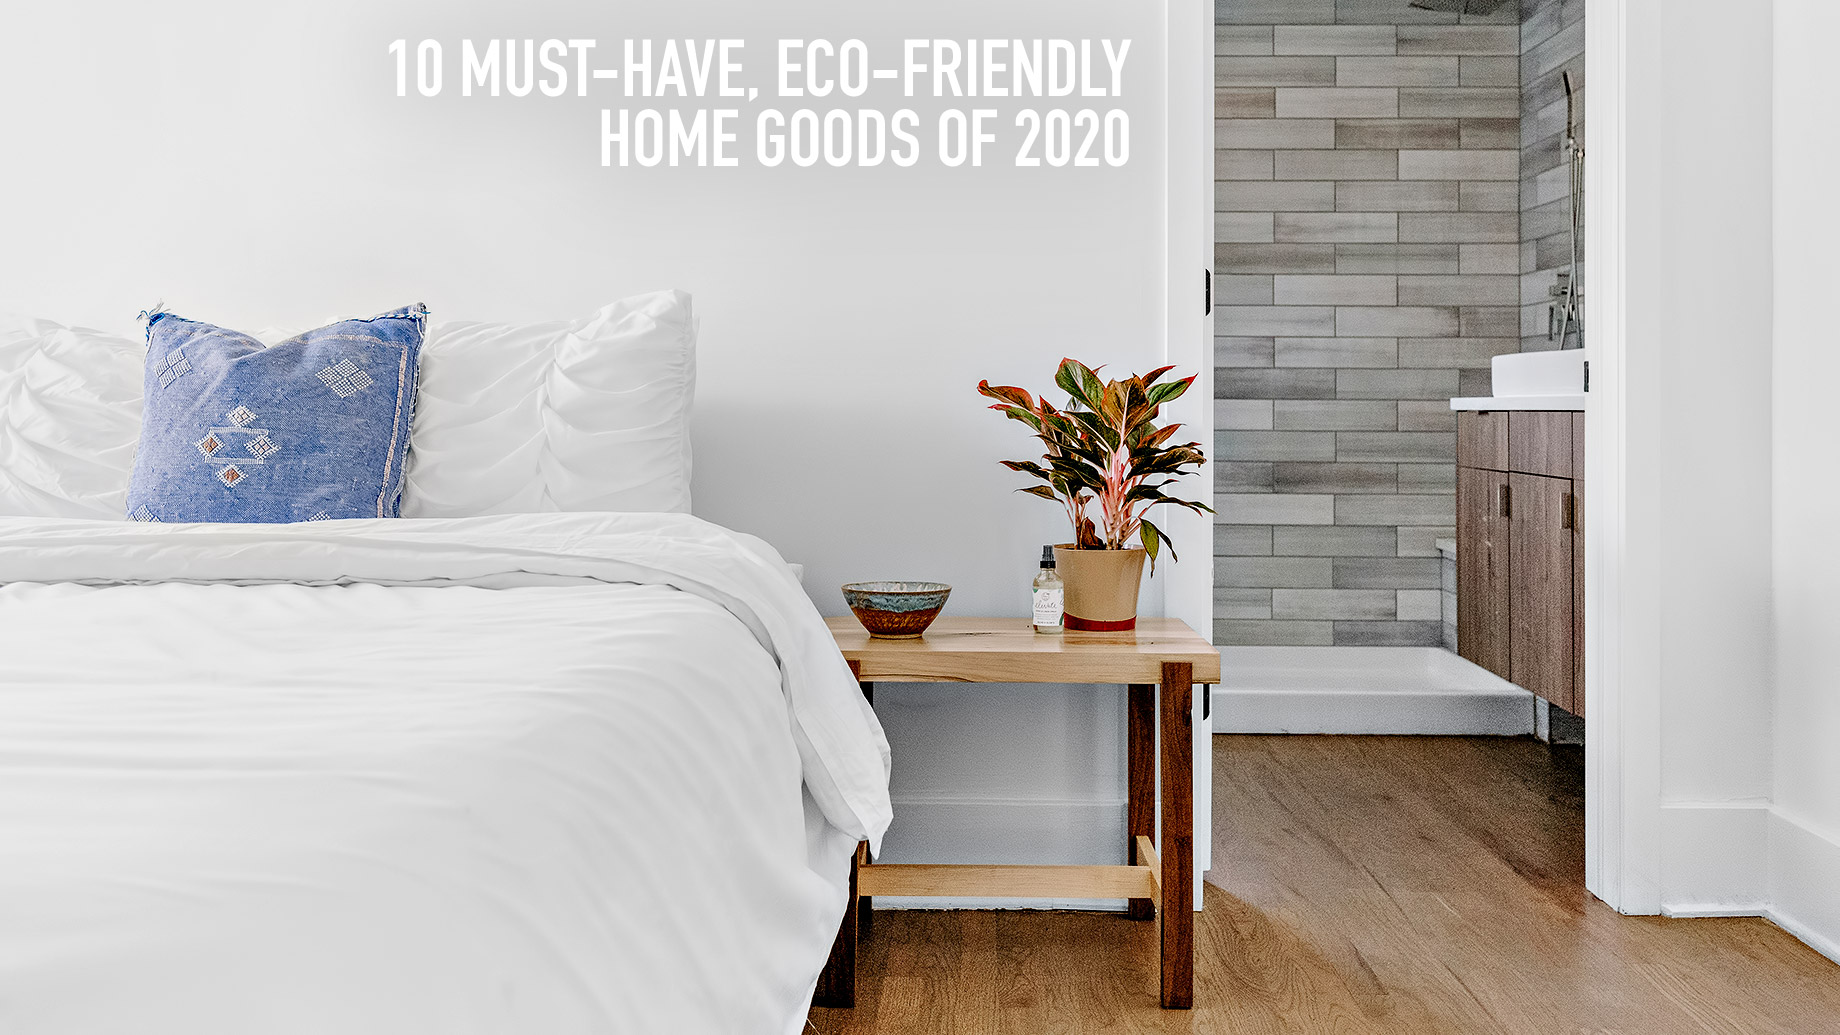 10 Must-Have, Eco-Friendly Home Goods of 2020